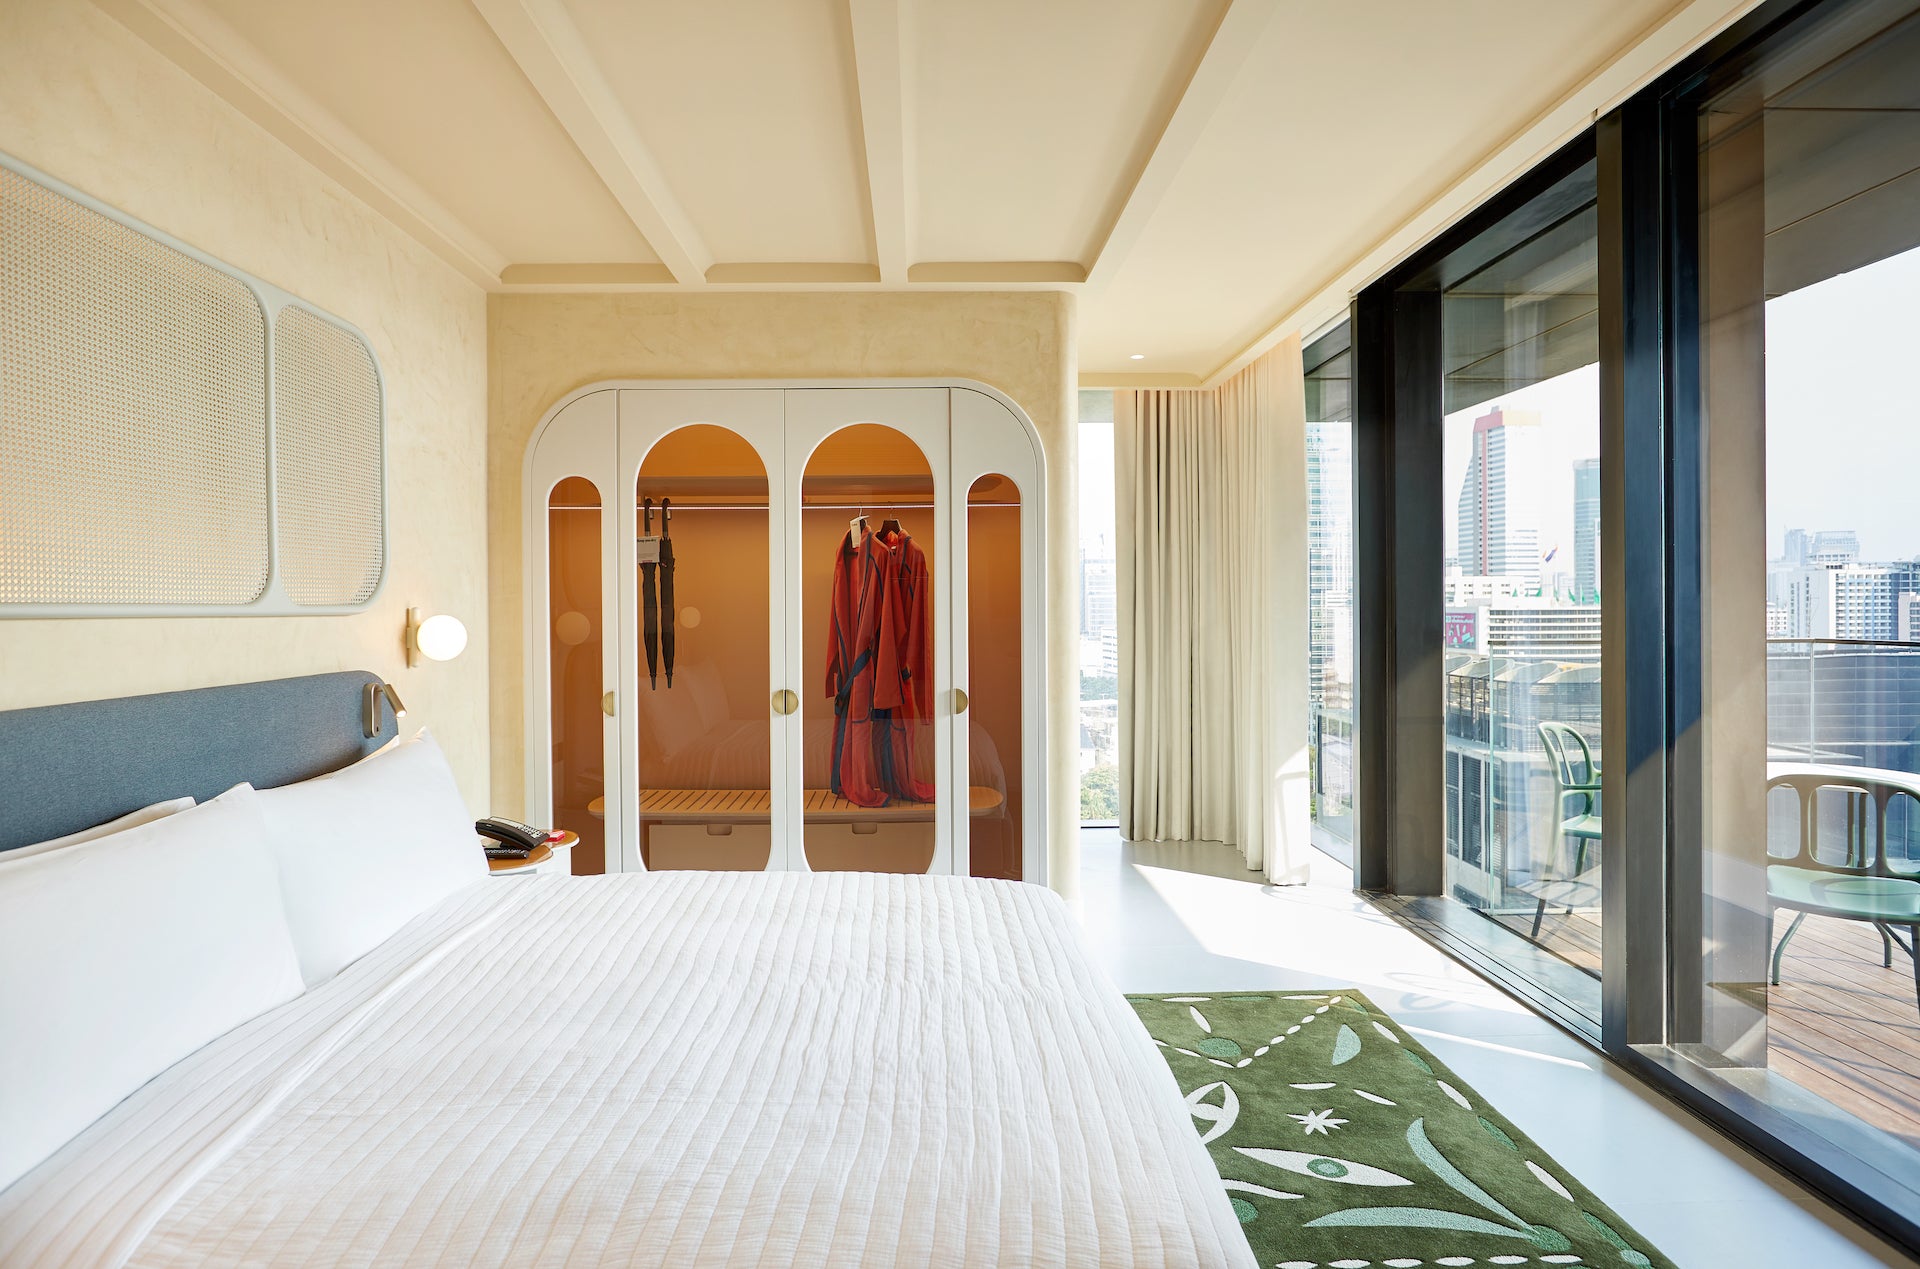 Balcony suite at the Standard Bangkok designed by Jaime Hayon, 2022. Photo © Standard Hotels; courtesy of Hayon Studio